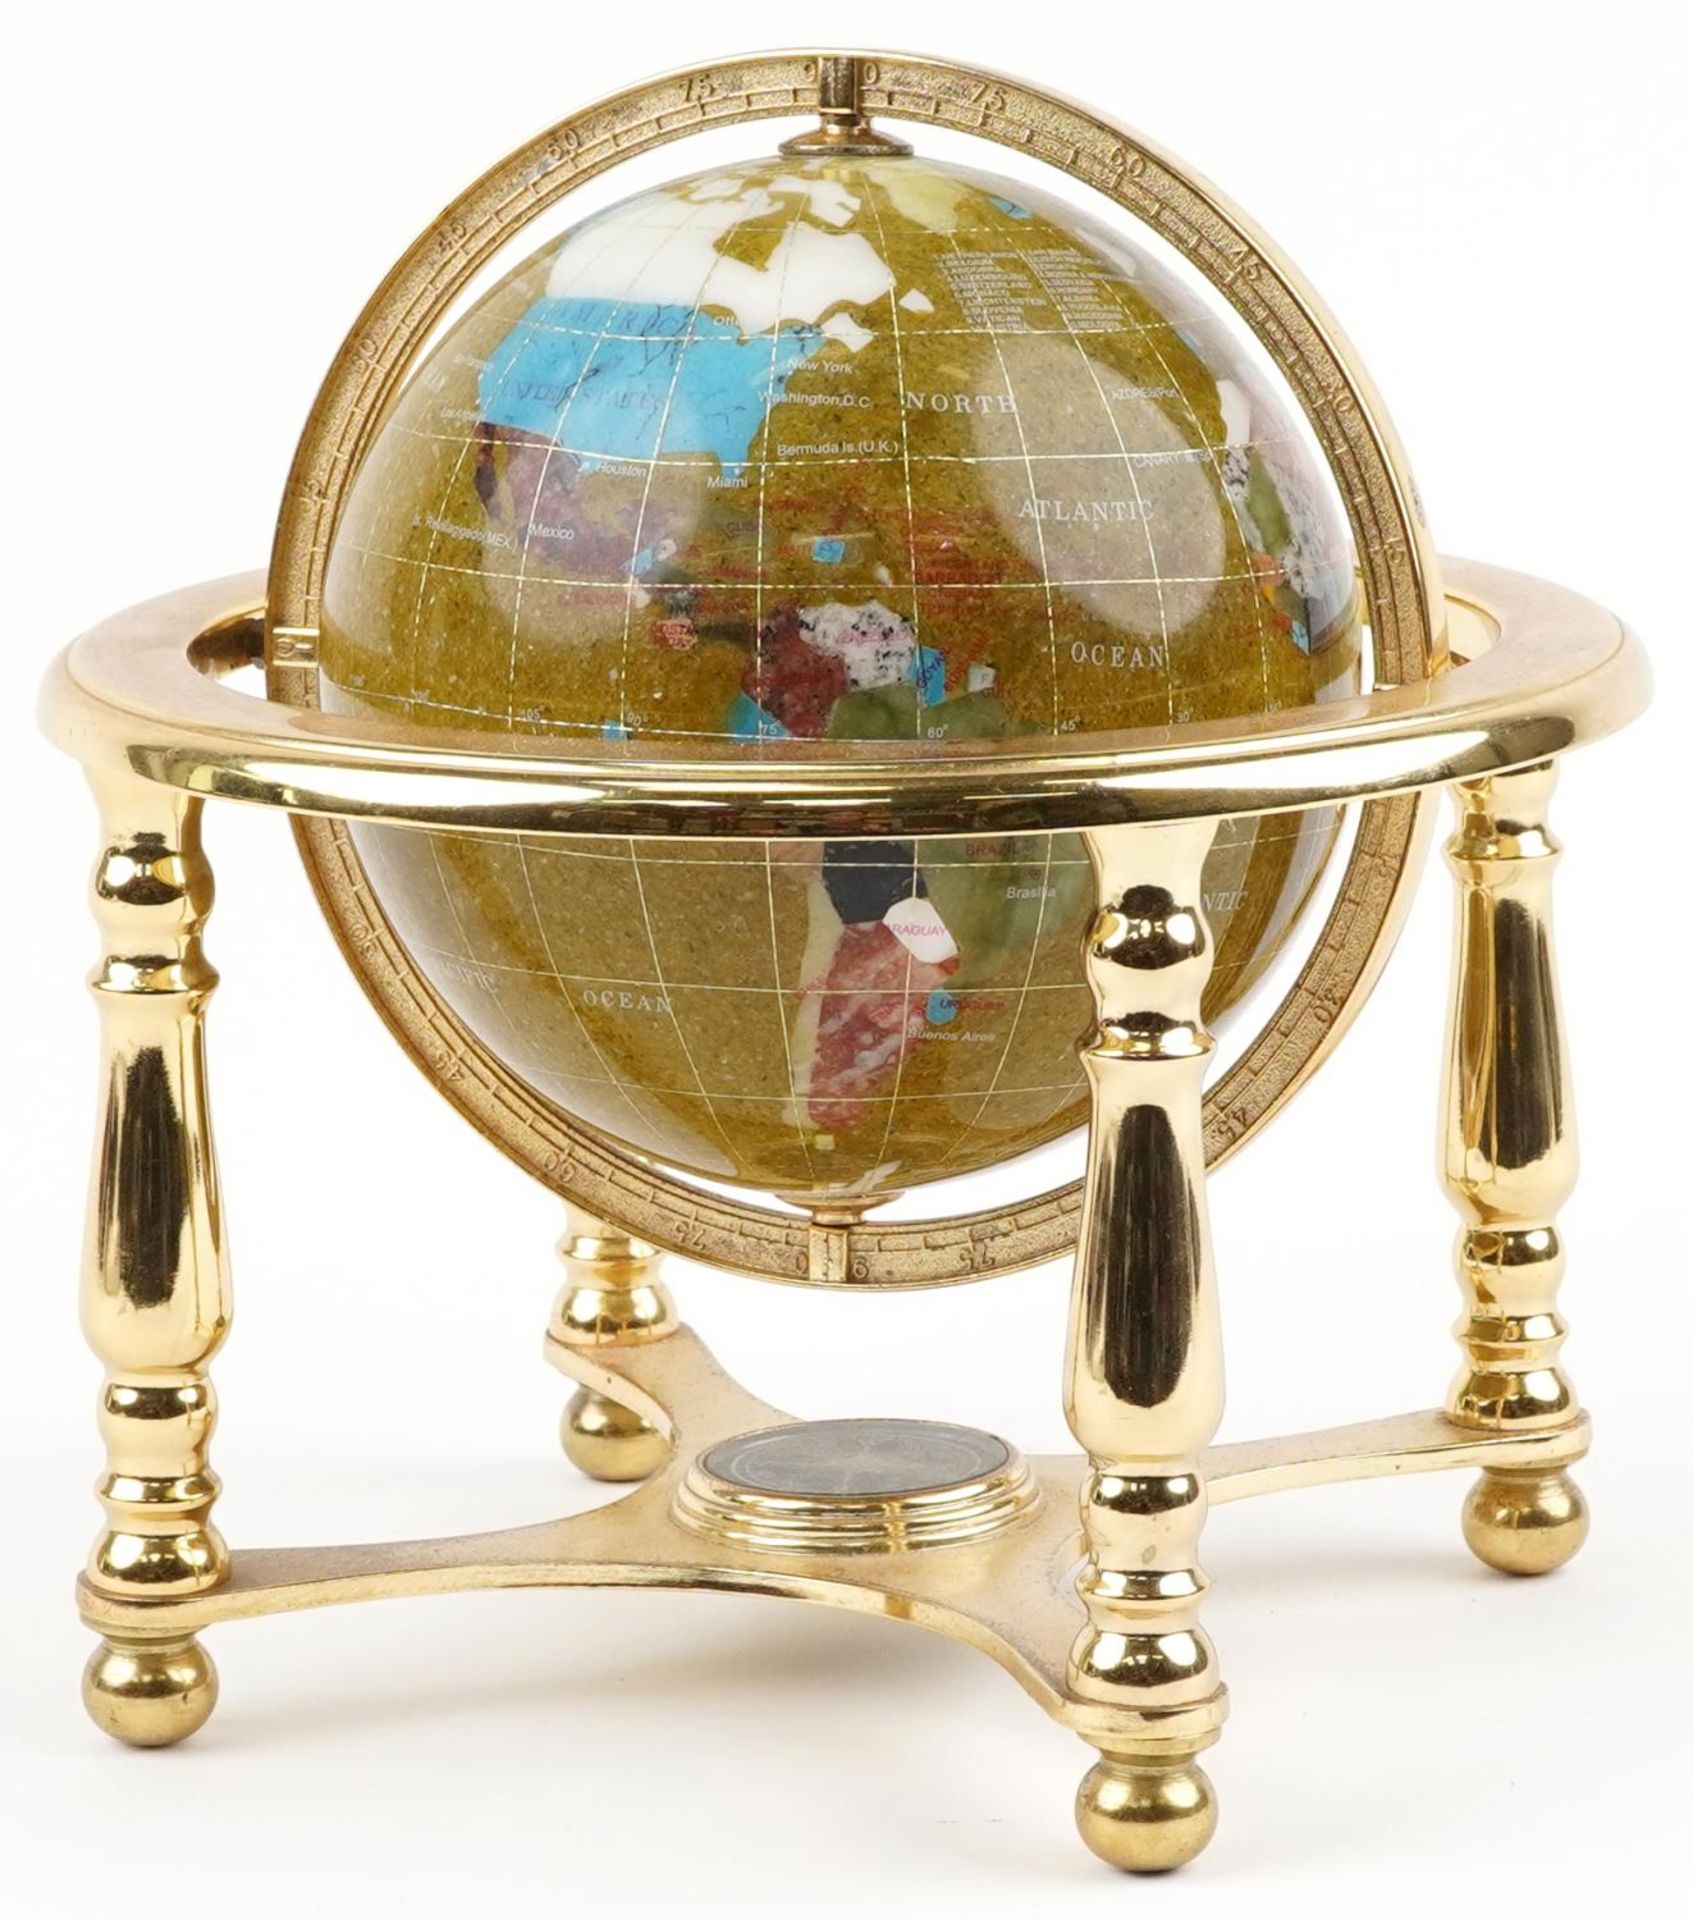 Contemporary polished stone table globe with brass stand and compass under tier, 23.5cm high - Bild 2 aus 3